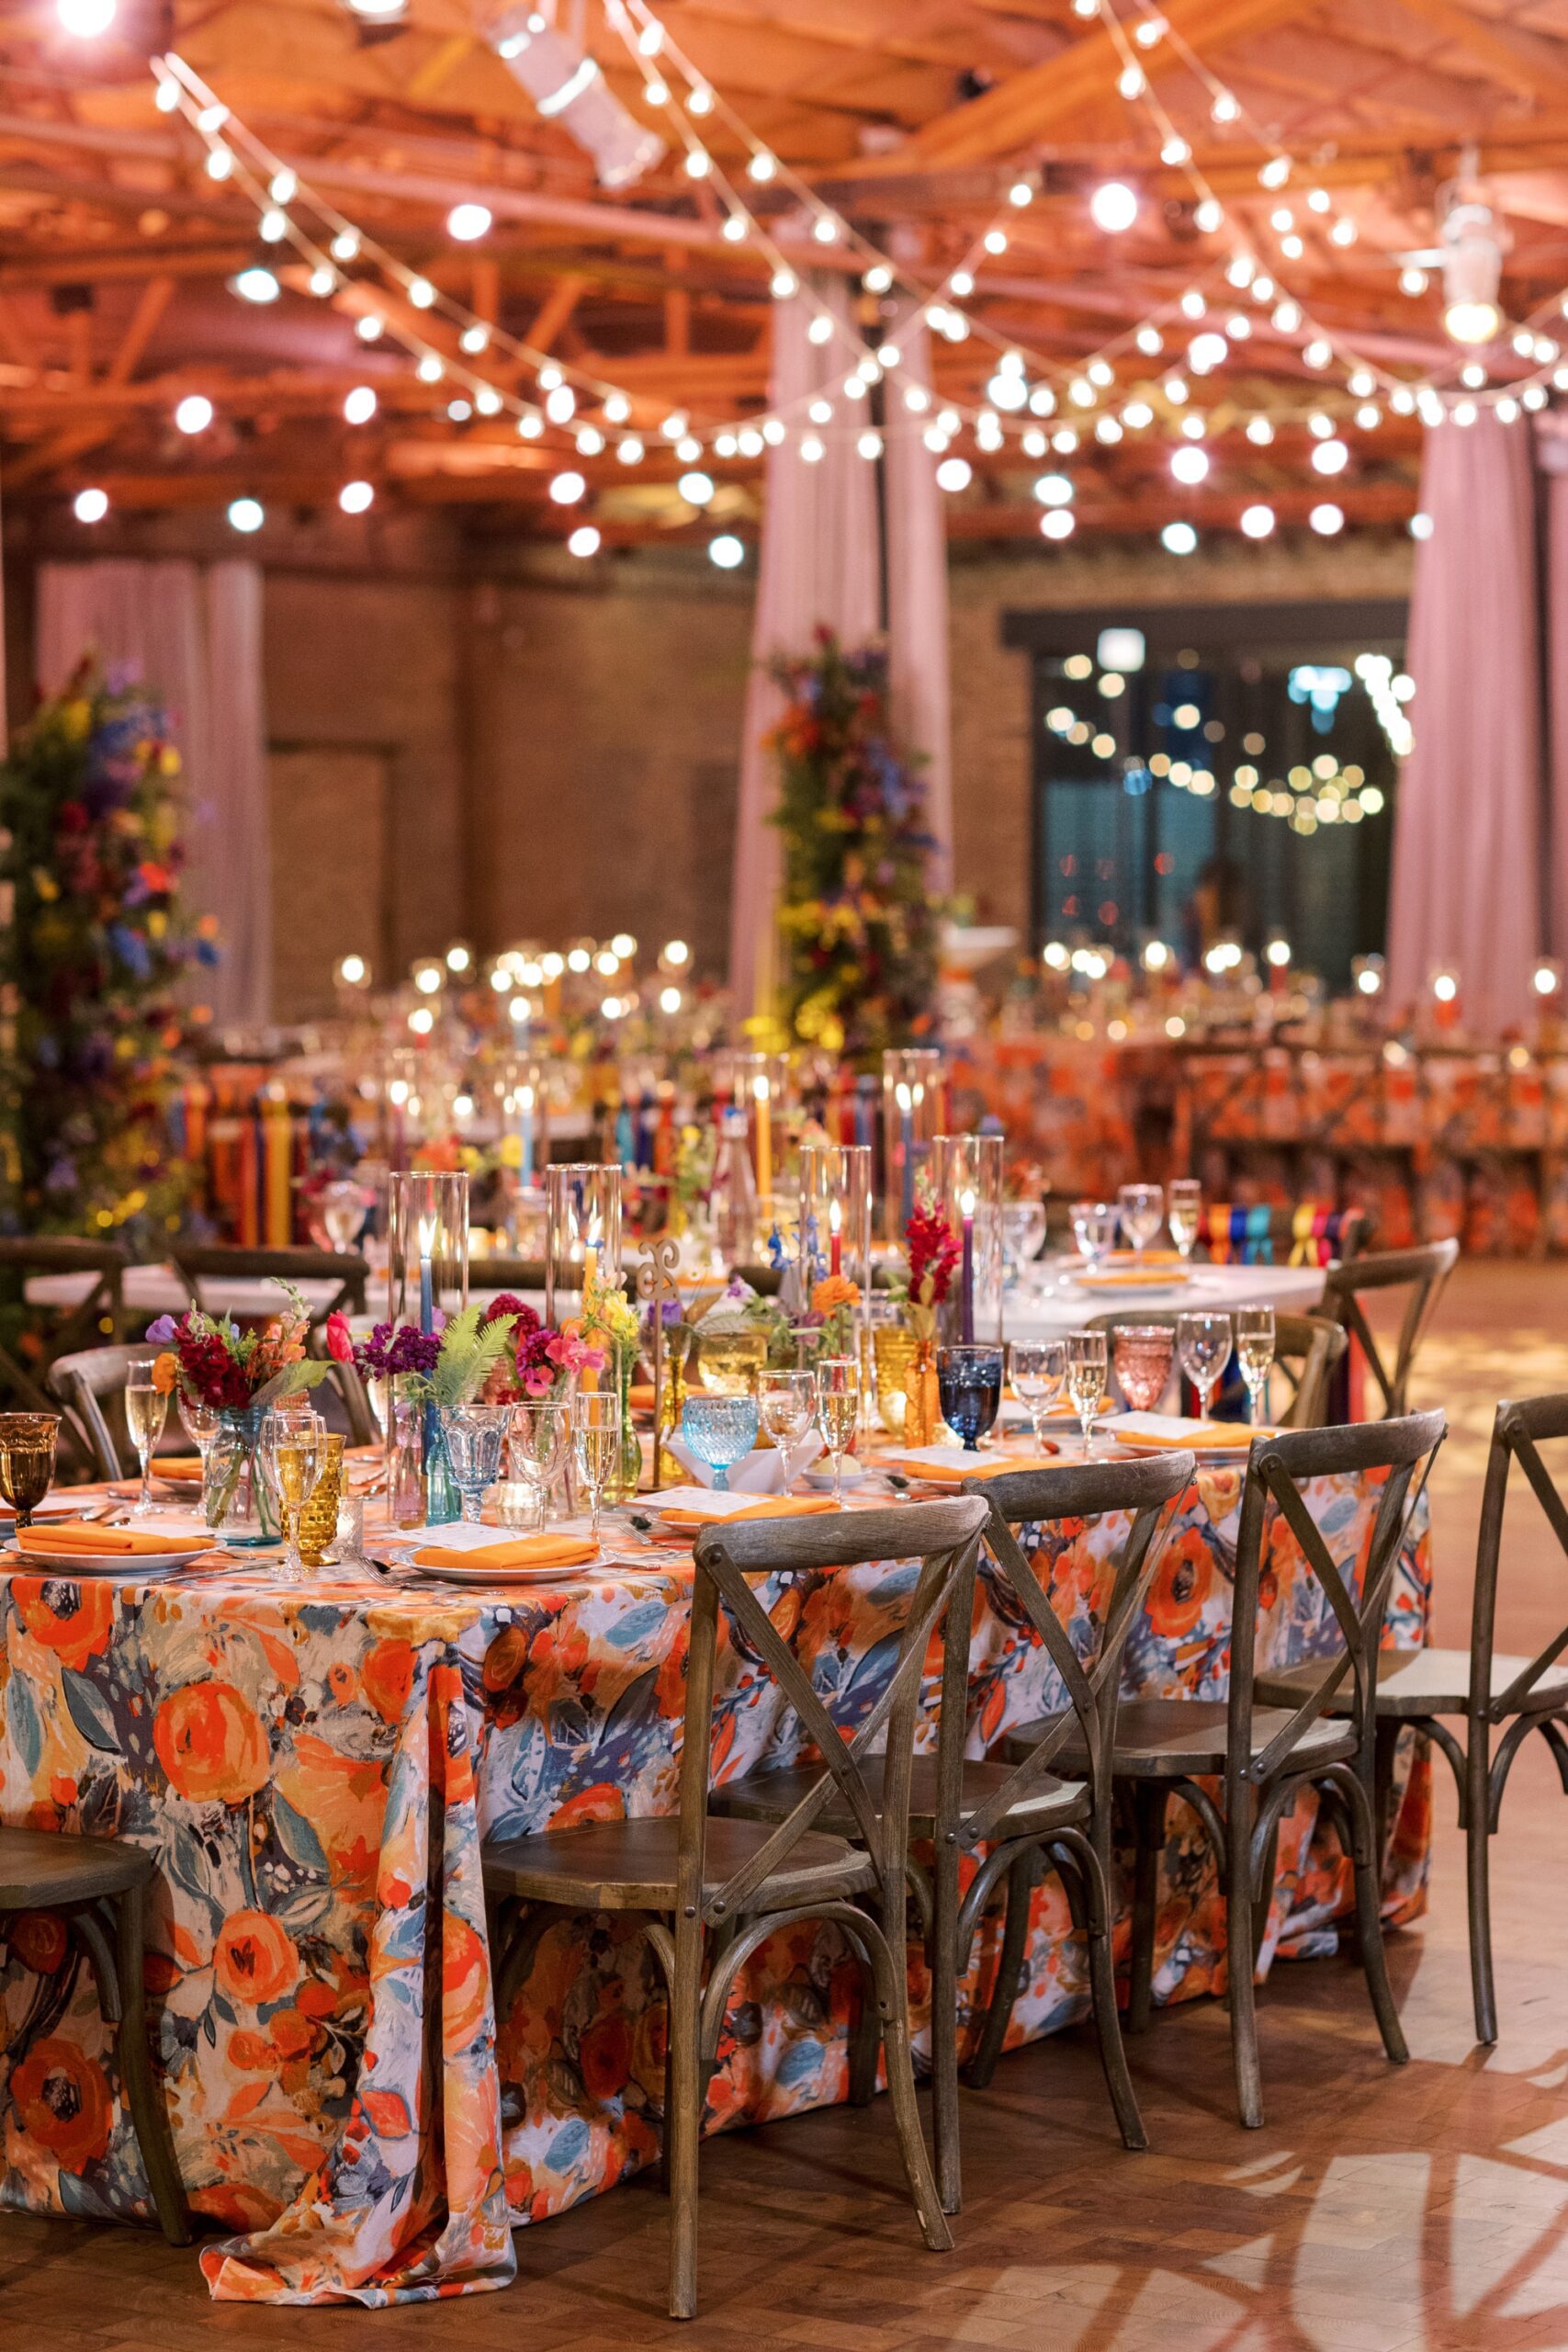 The colorful wedding reception featured a colorful wedding palette